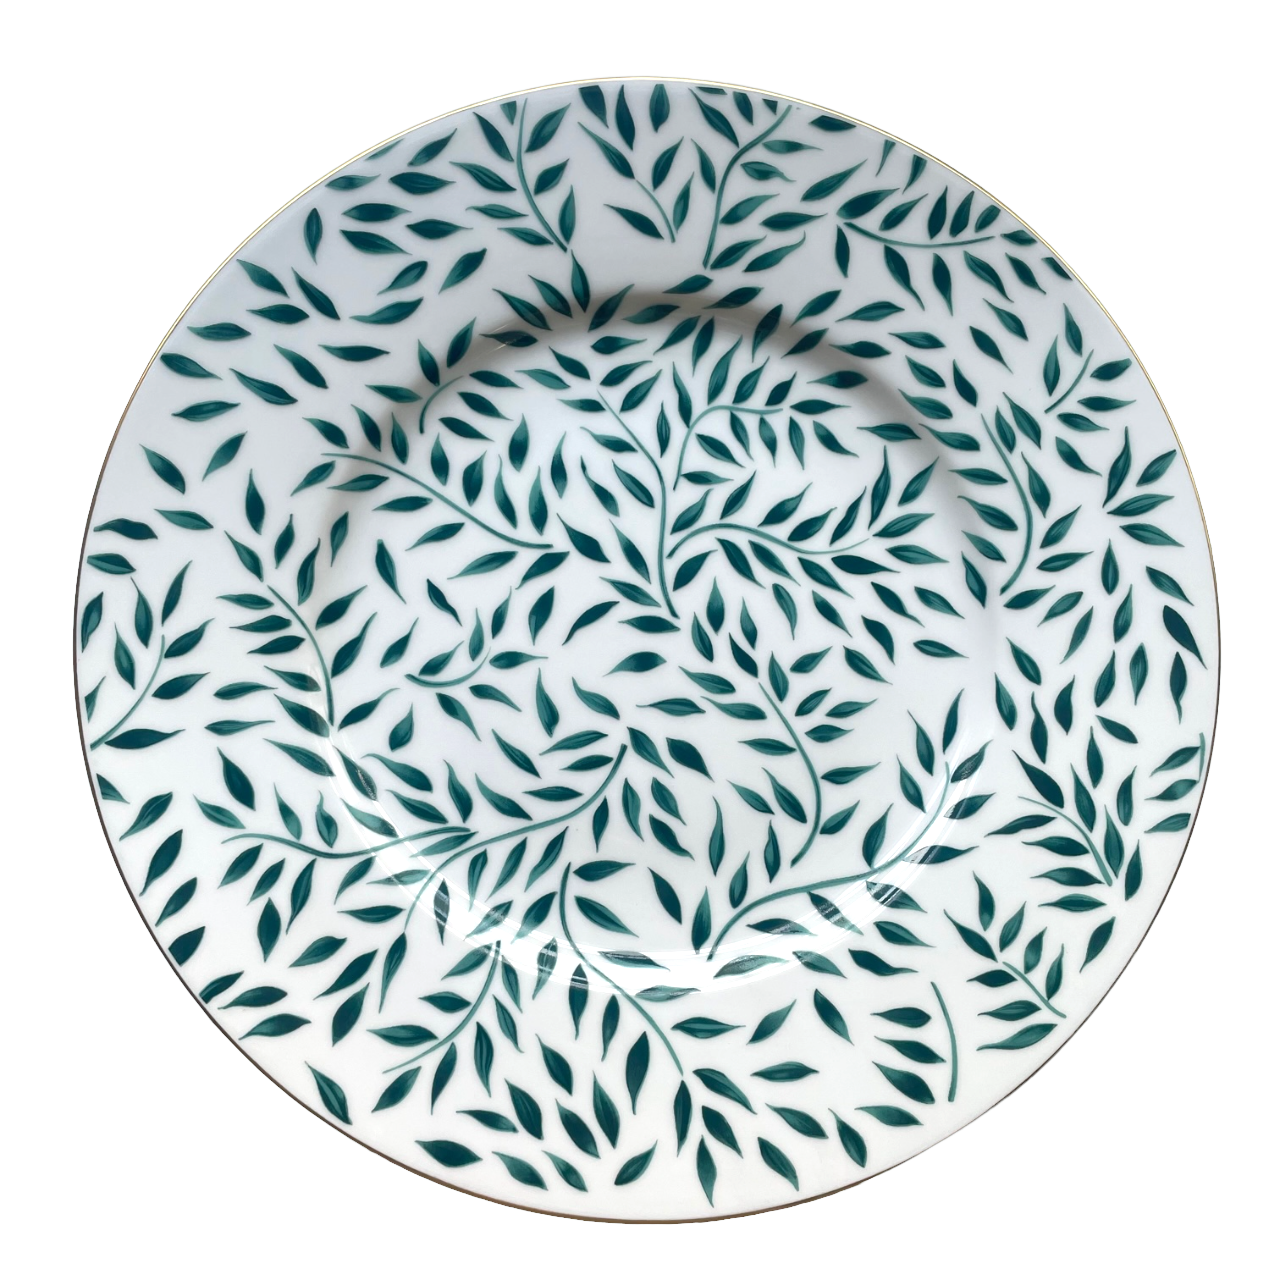 Olivier green  - Charger plate 32 cm